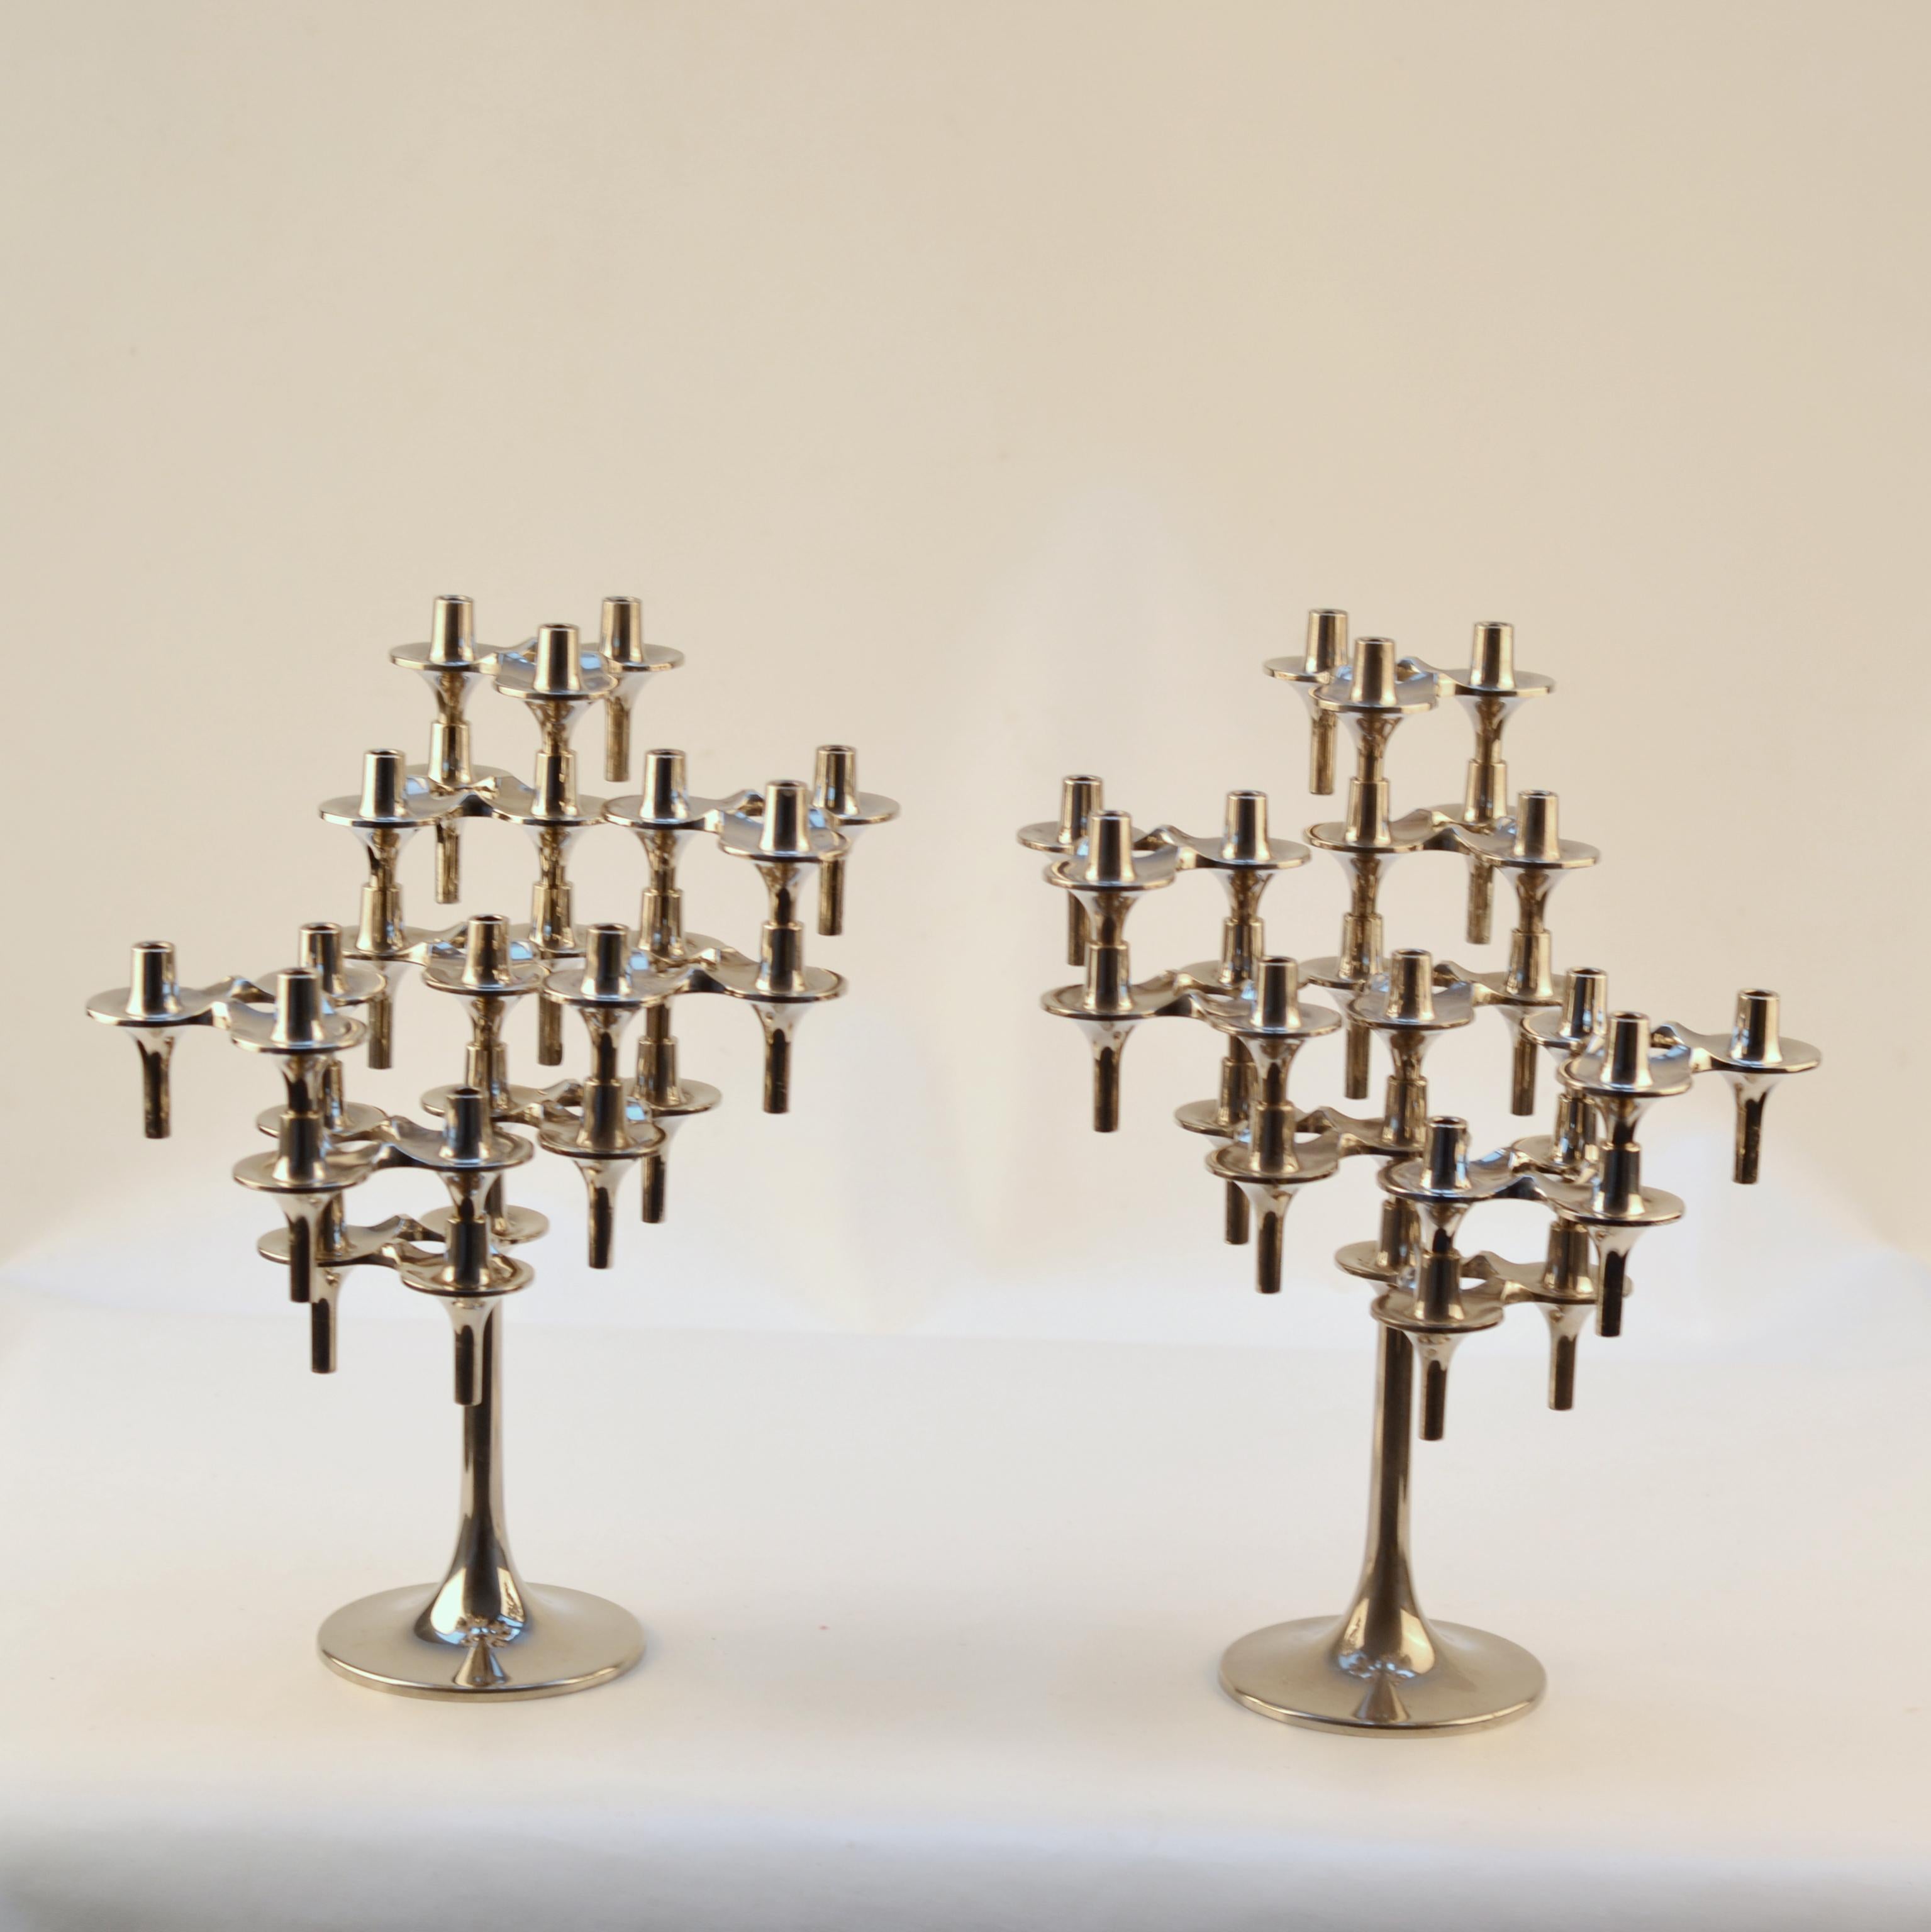 German Pair of Modular Orion Candelabras by Nagel, 1960's